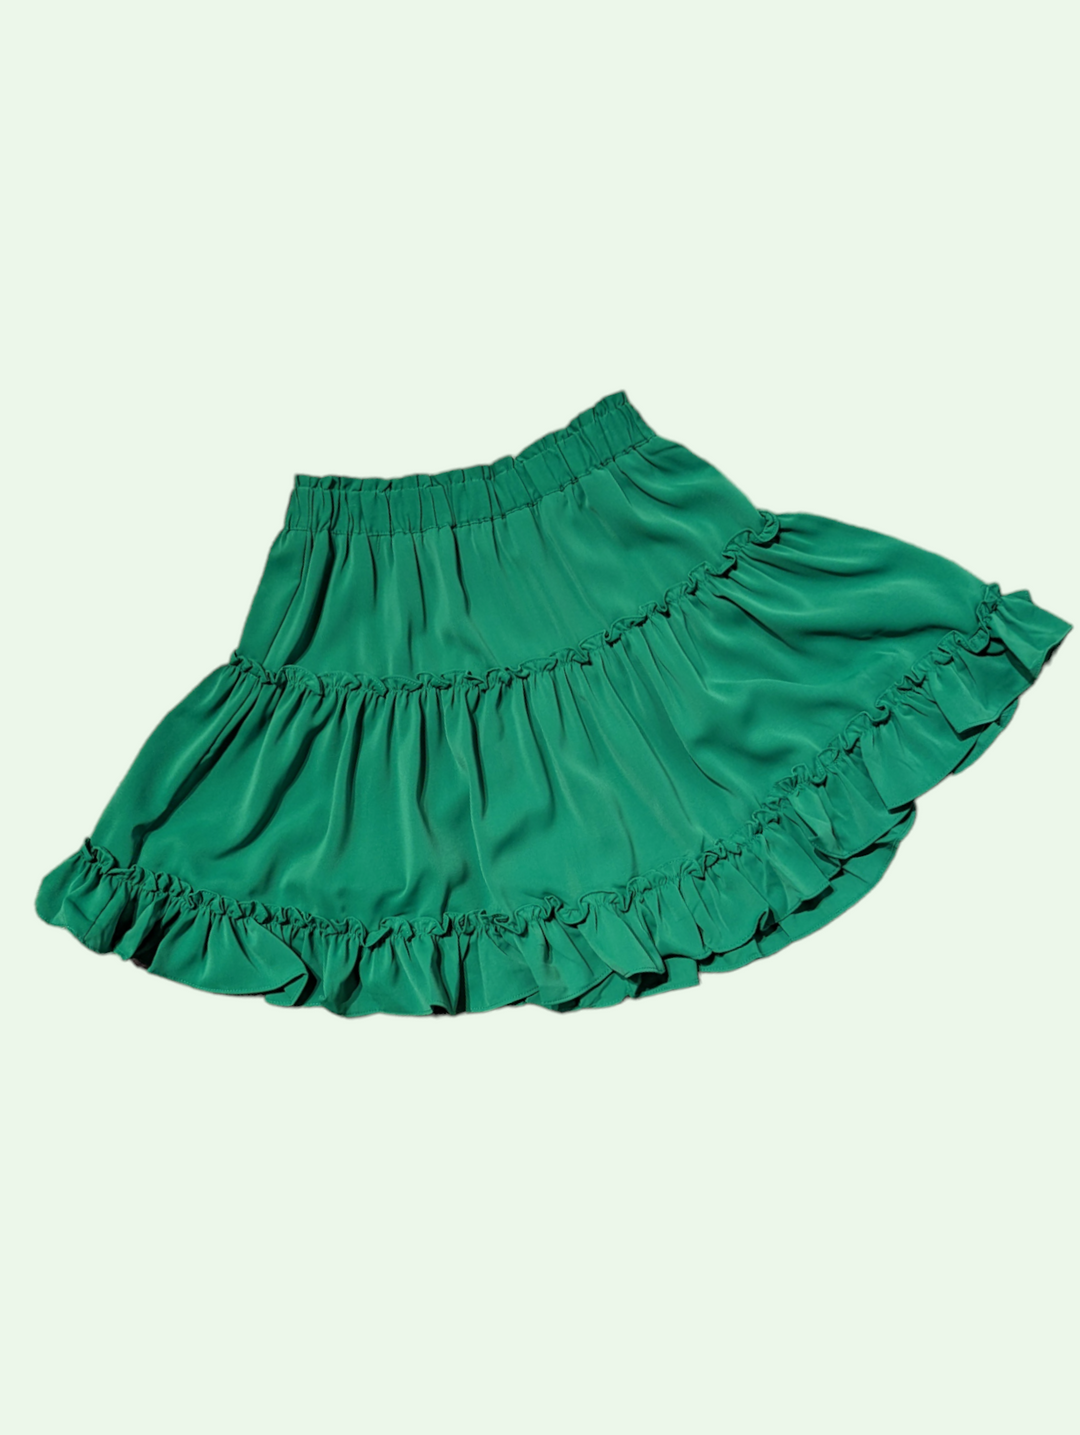 the ruffle skirt in a flat lay 